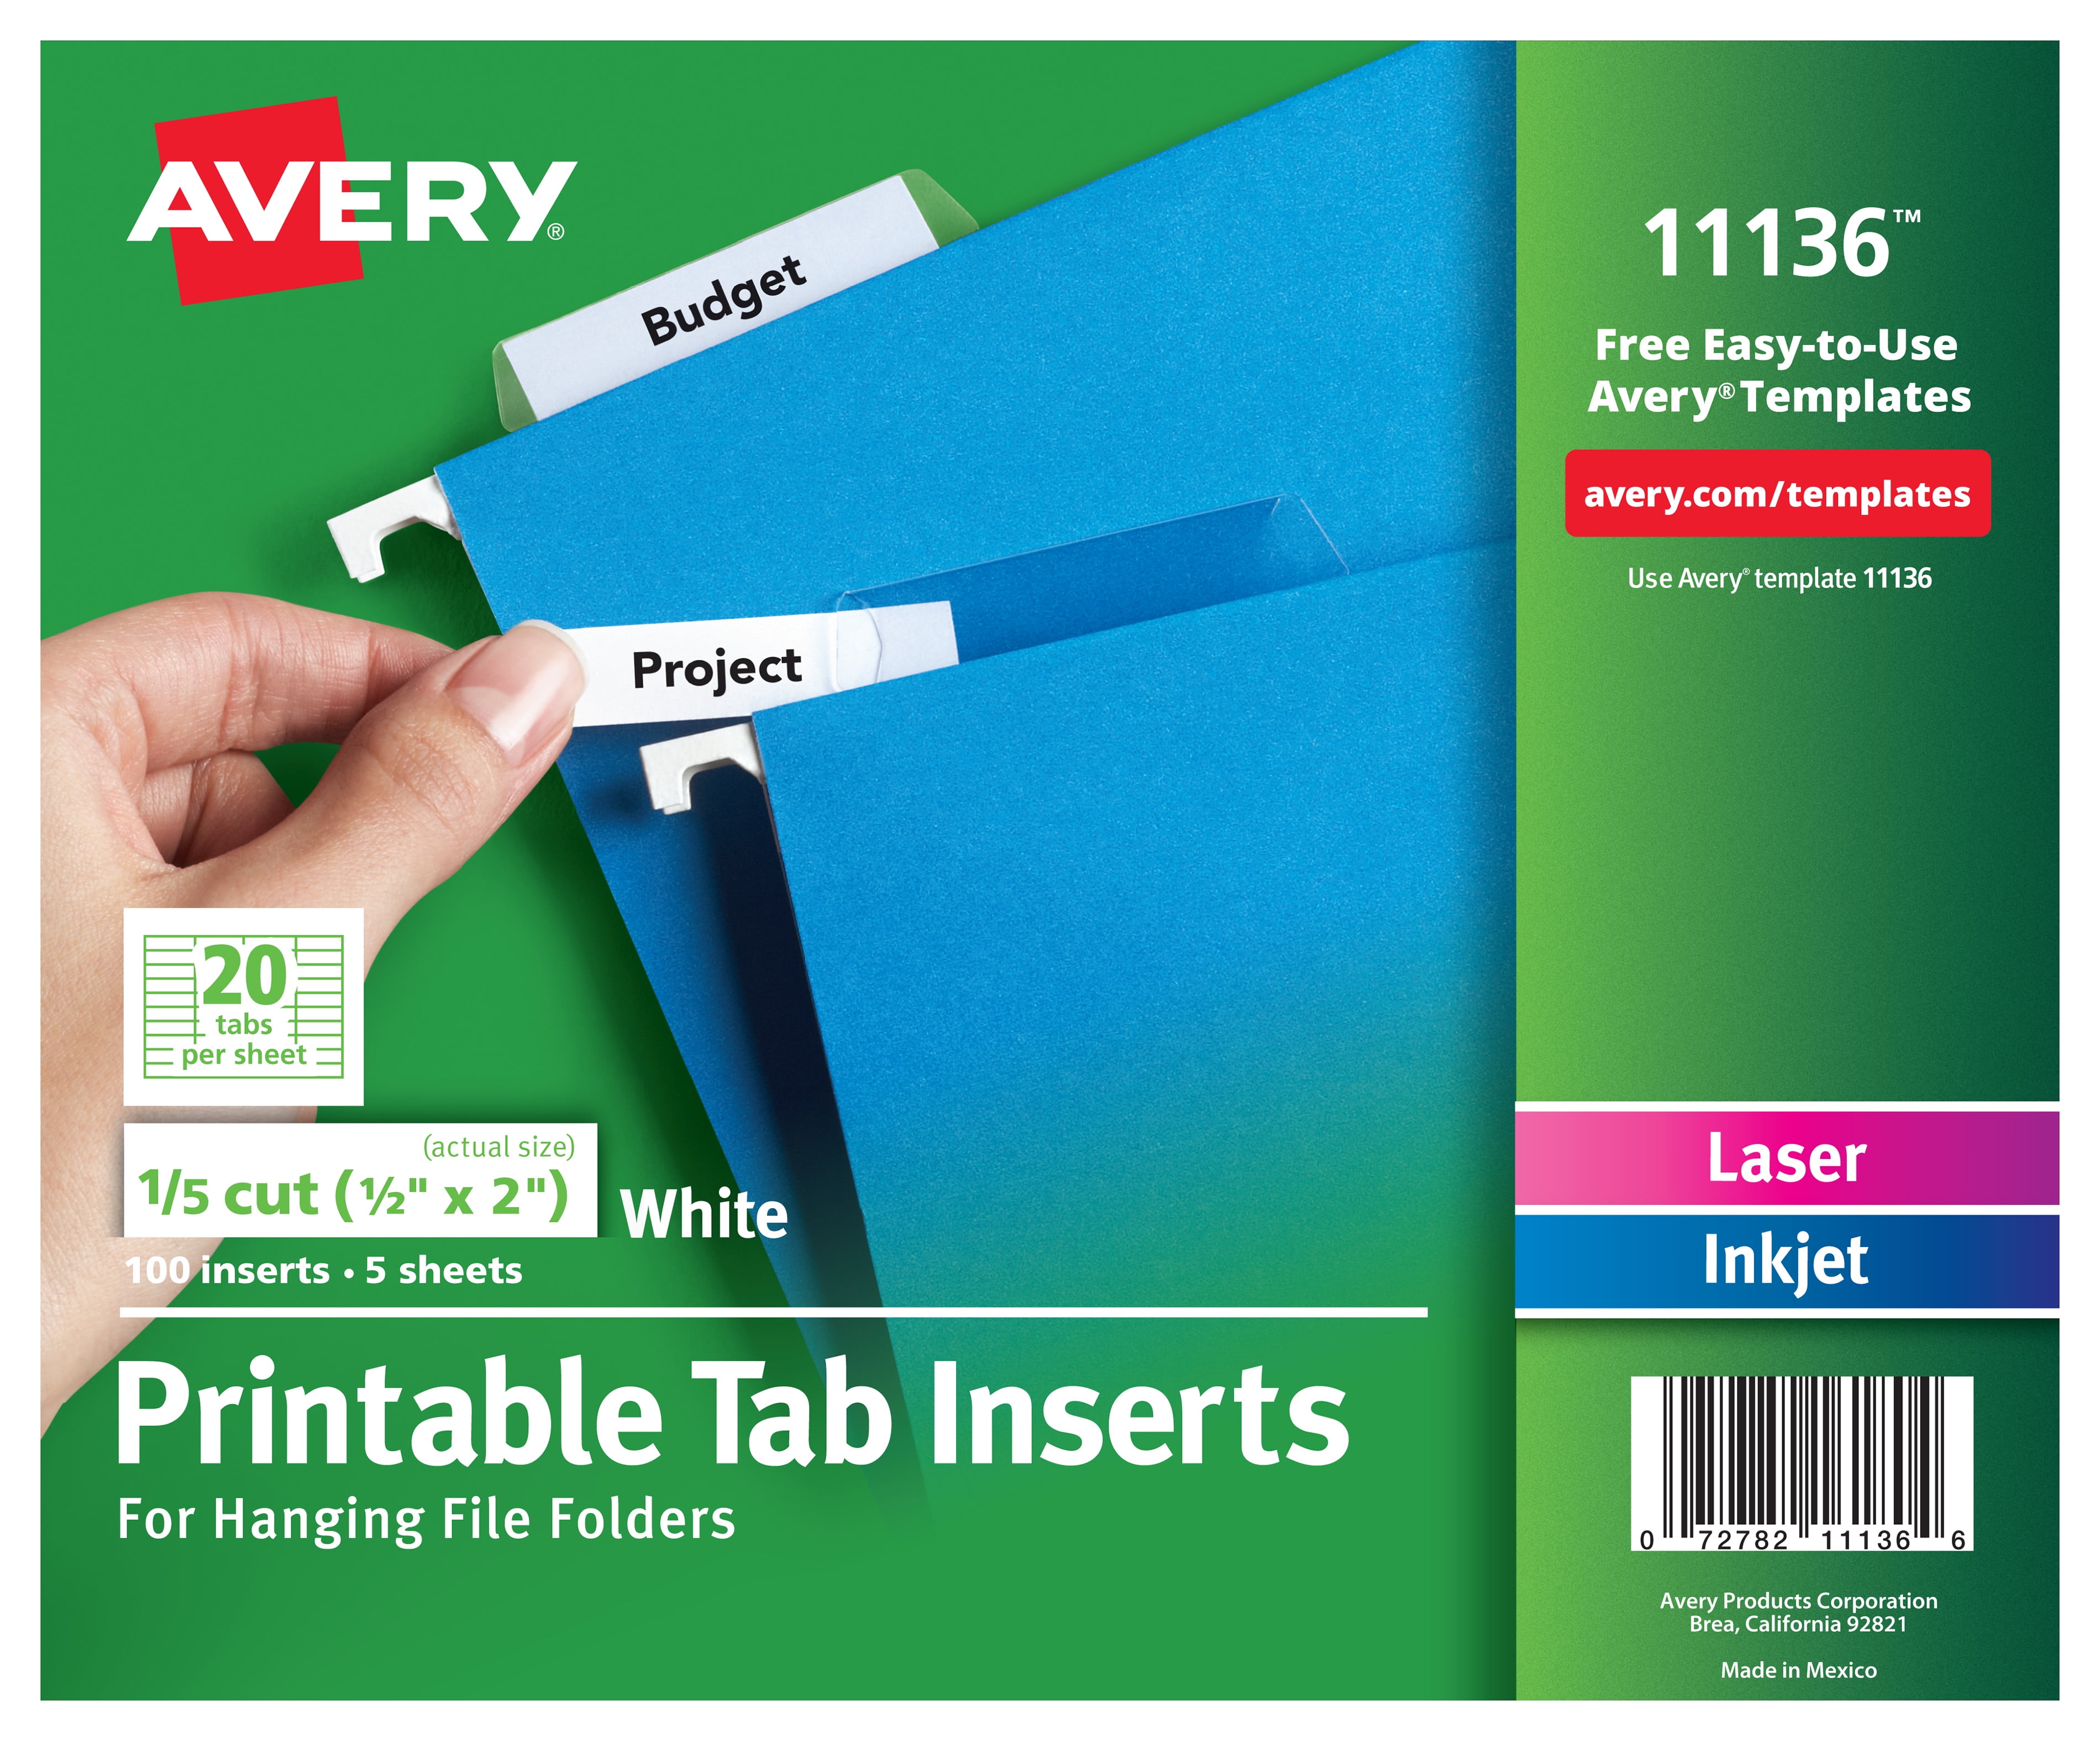 Avery Printable Tab Inserts For Hanging File Folders 1 5 Cut 2 Pack Of 100 11136 Walmart